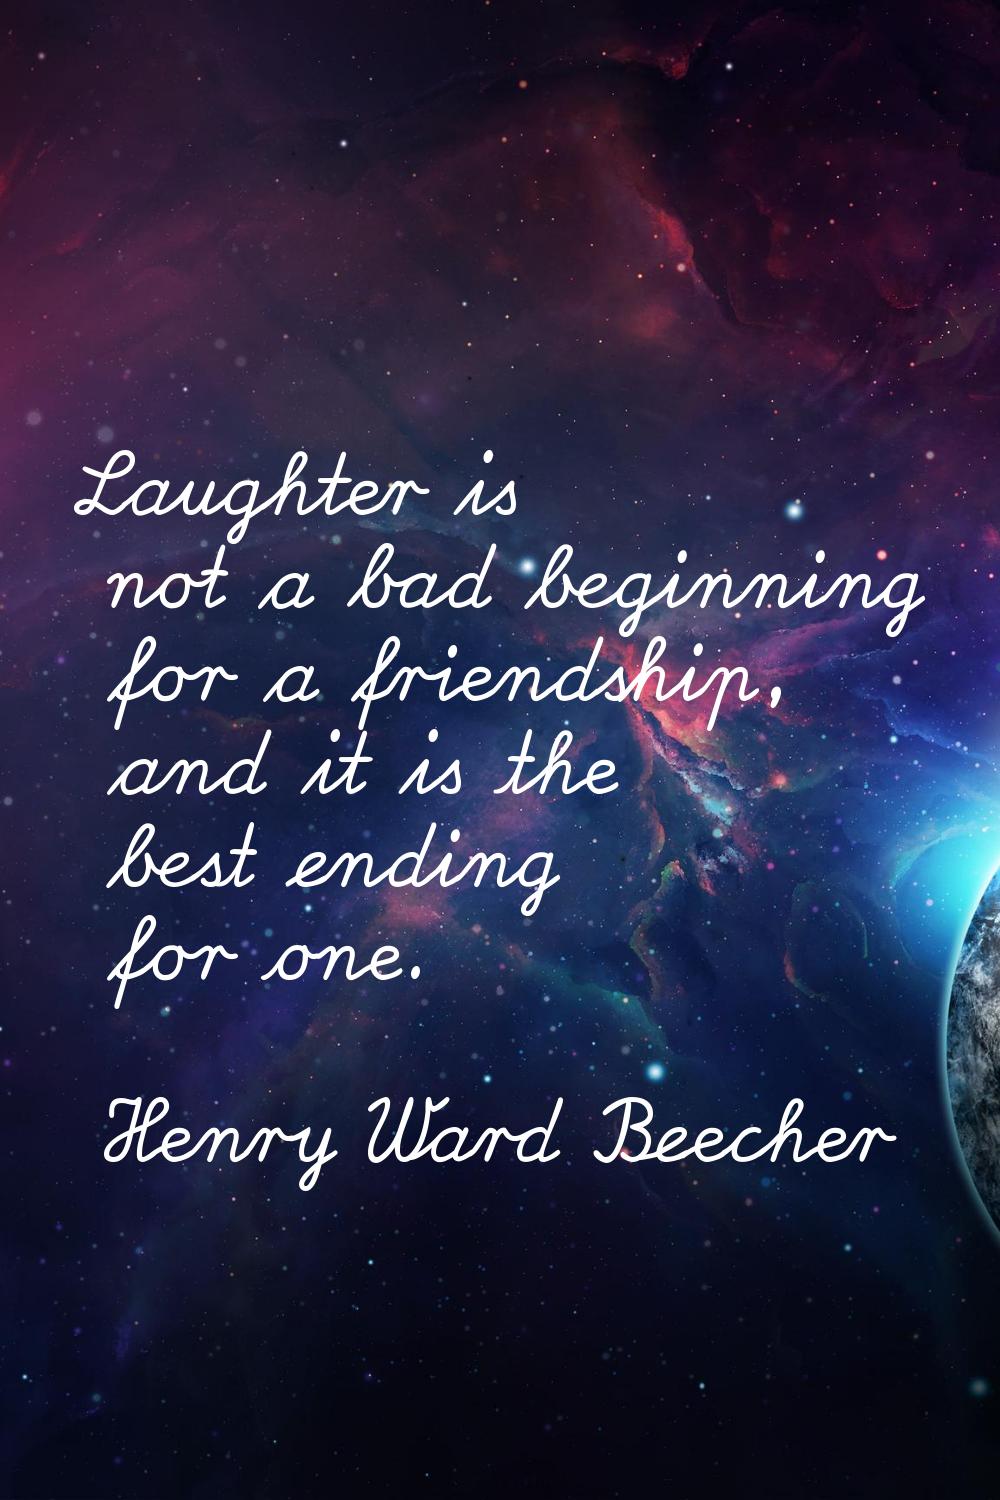 Laughter is not a bad beginning for a friendship, and it is the best ending for one.